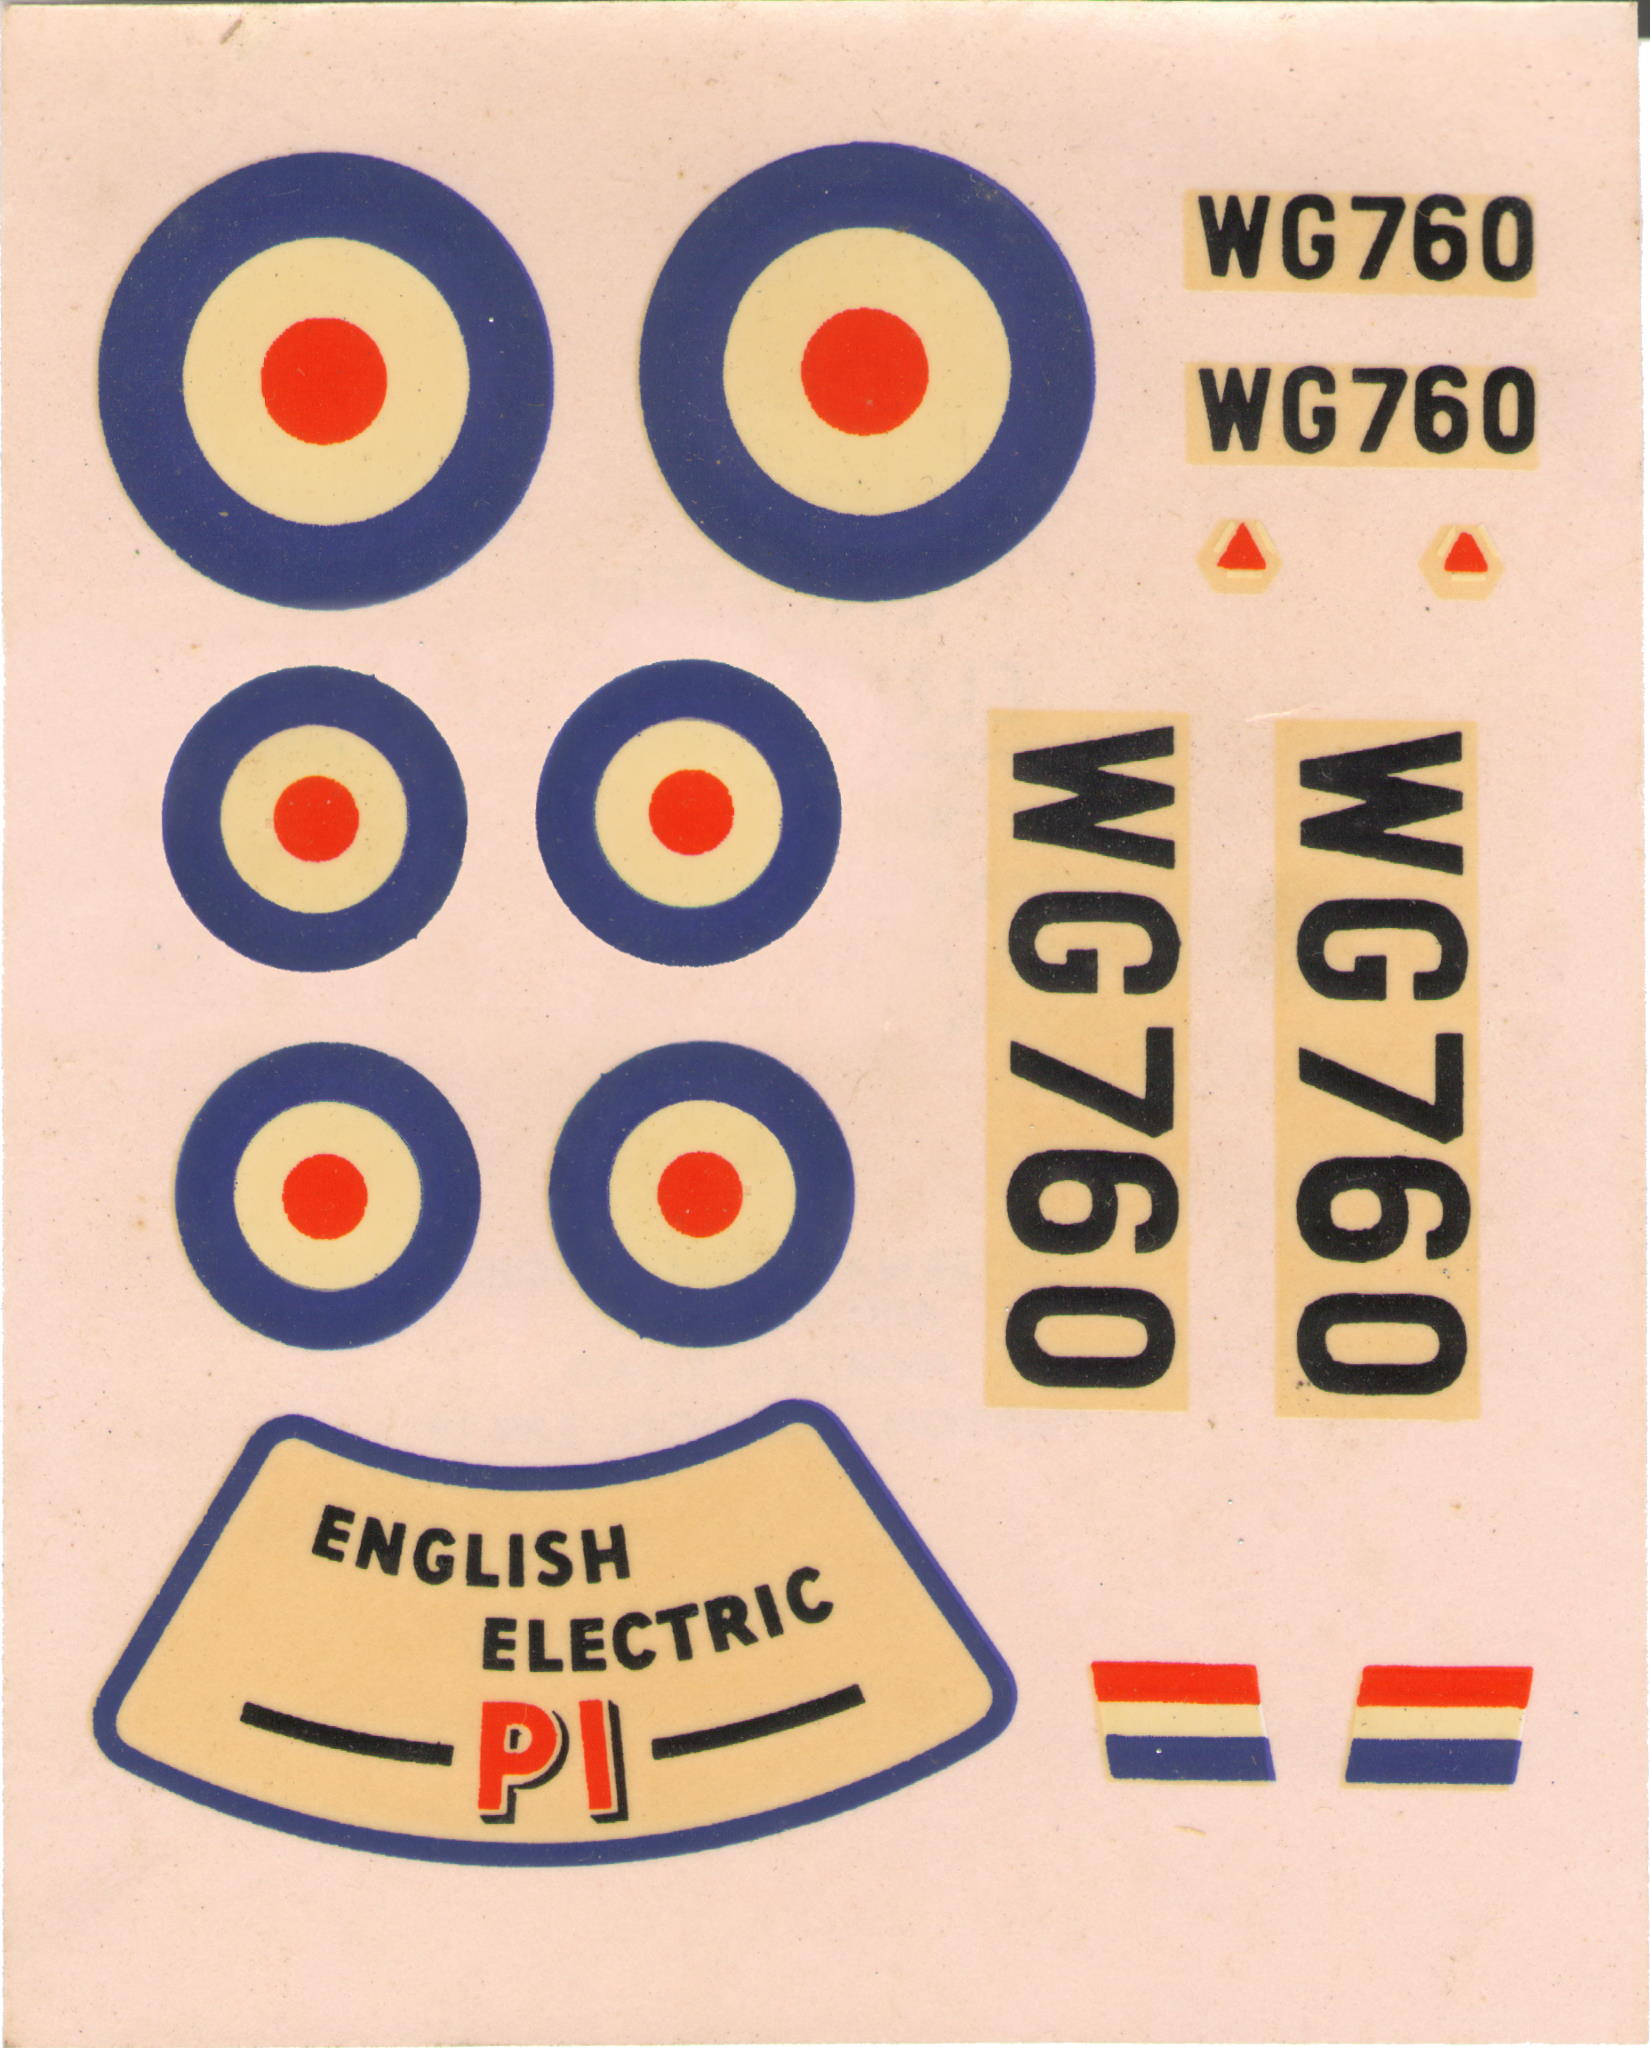 FROG 332P English Electric P.1, International Model Aircraft Limited, 1957, waterslide transfers